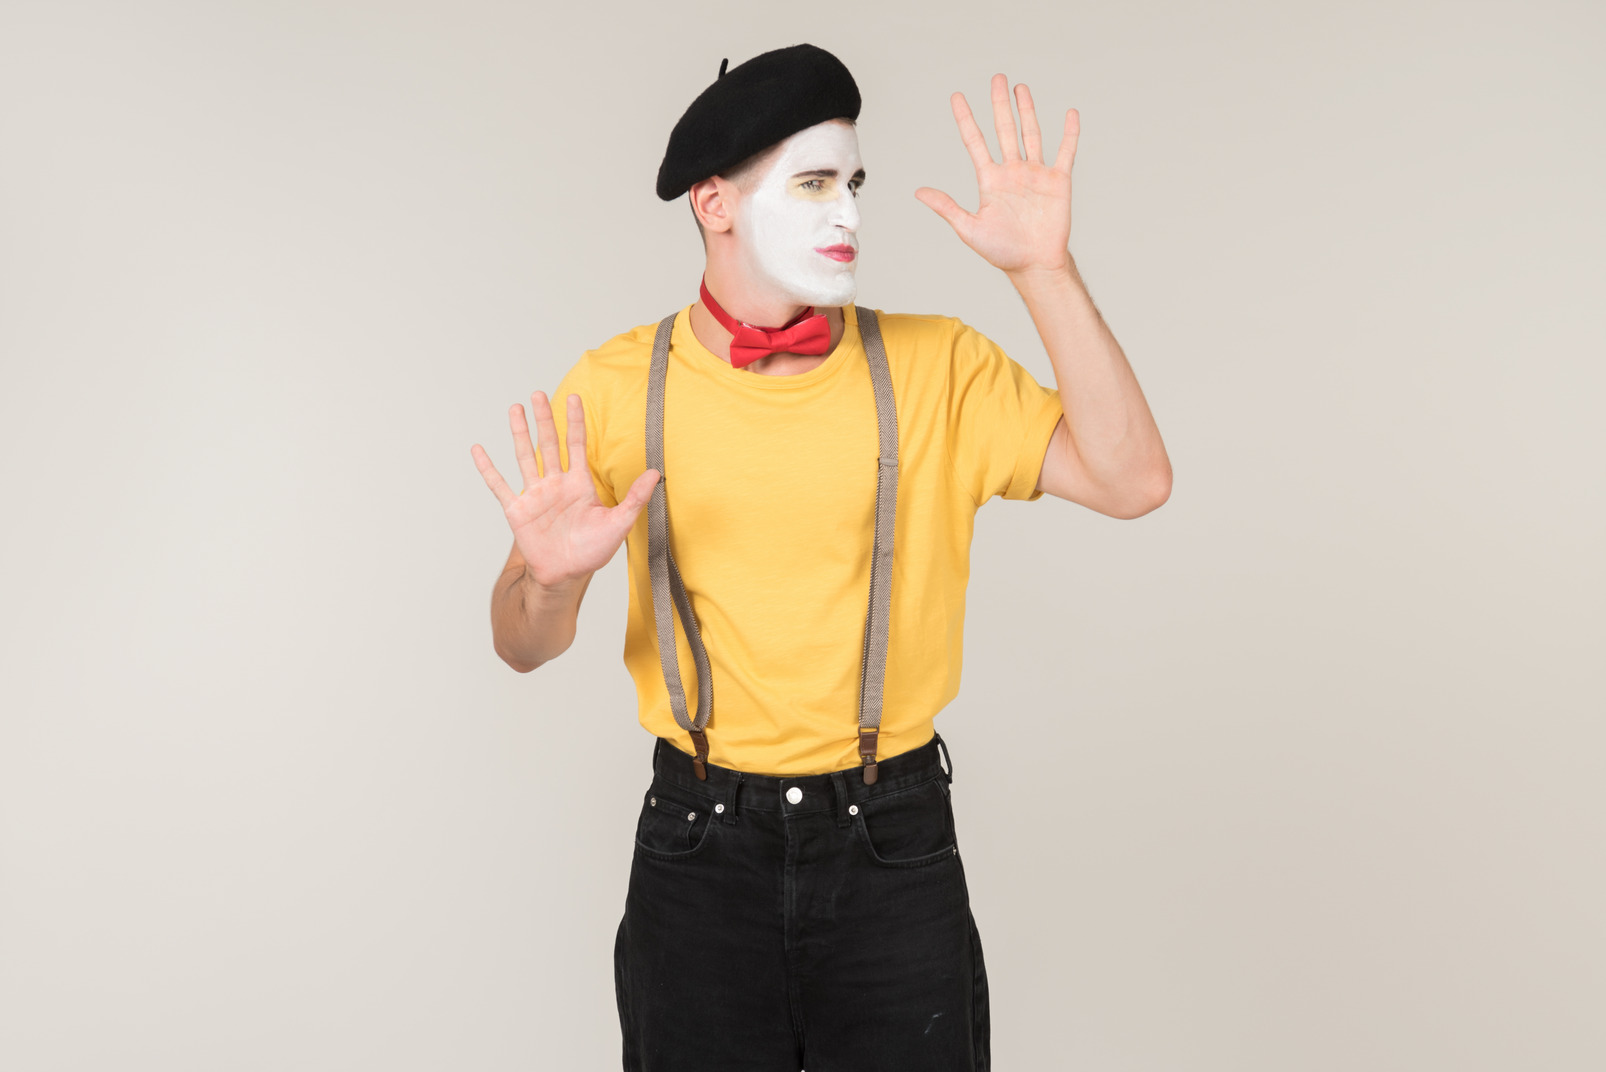 Male mime seems like can't get out